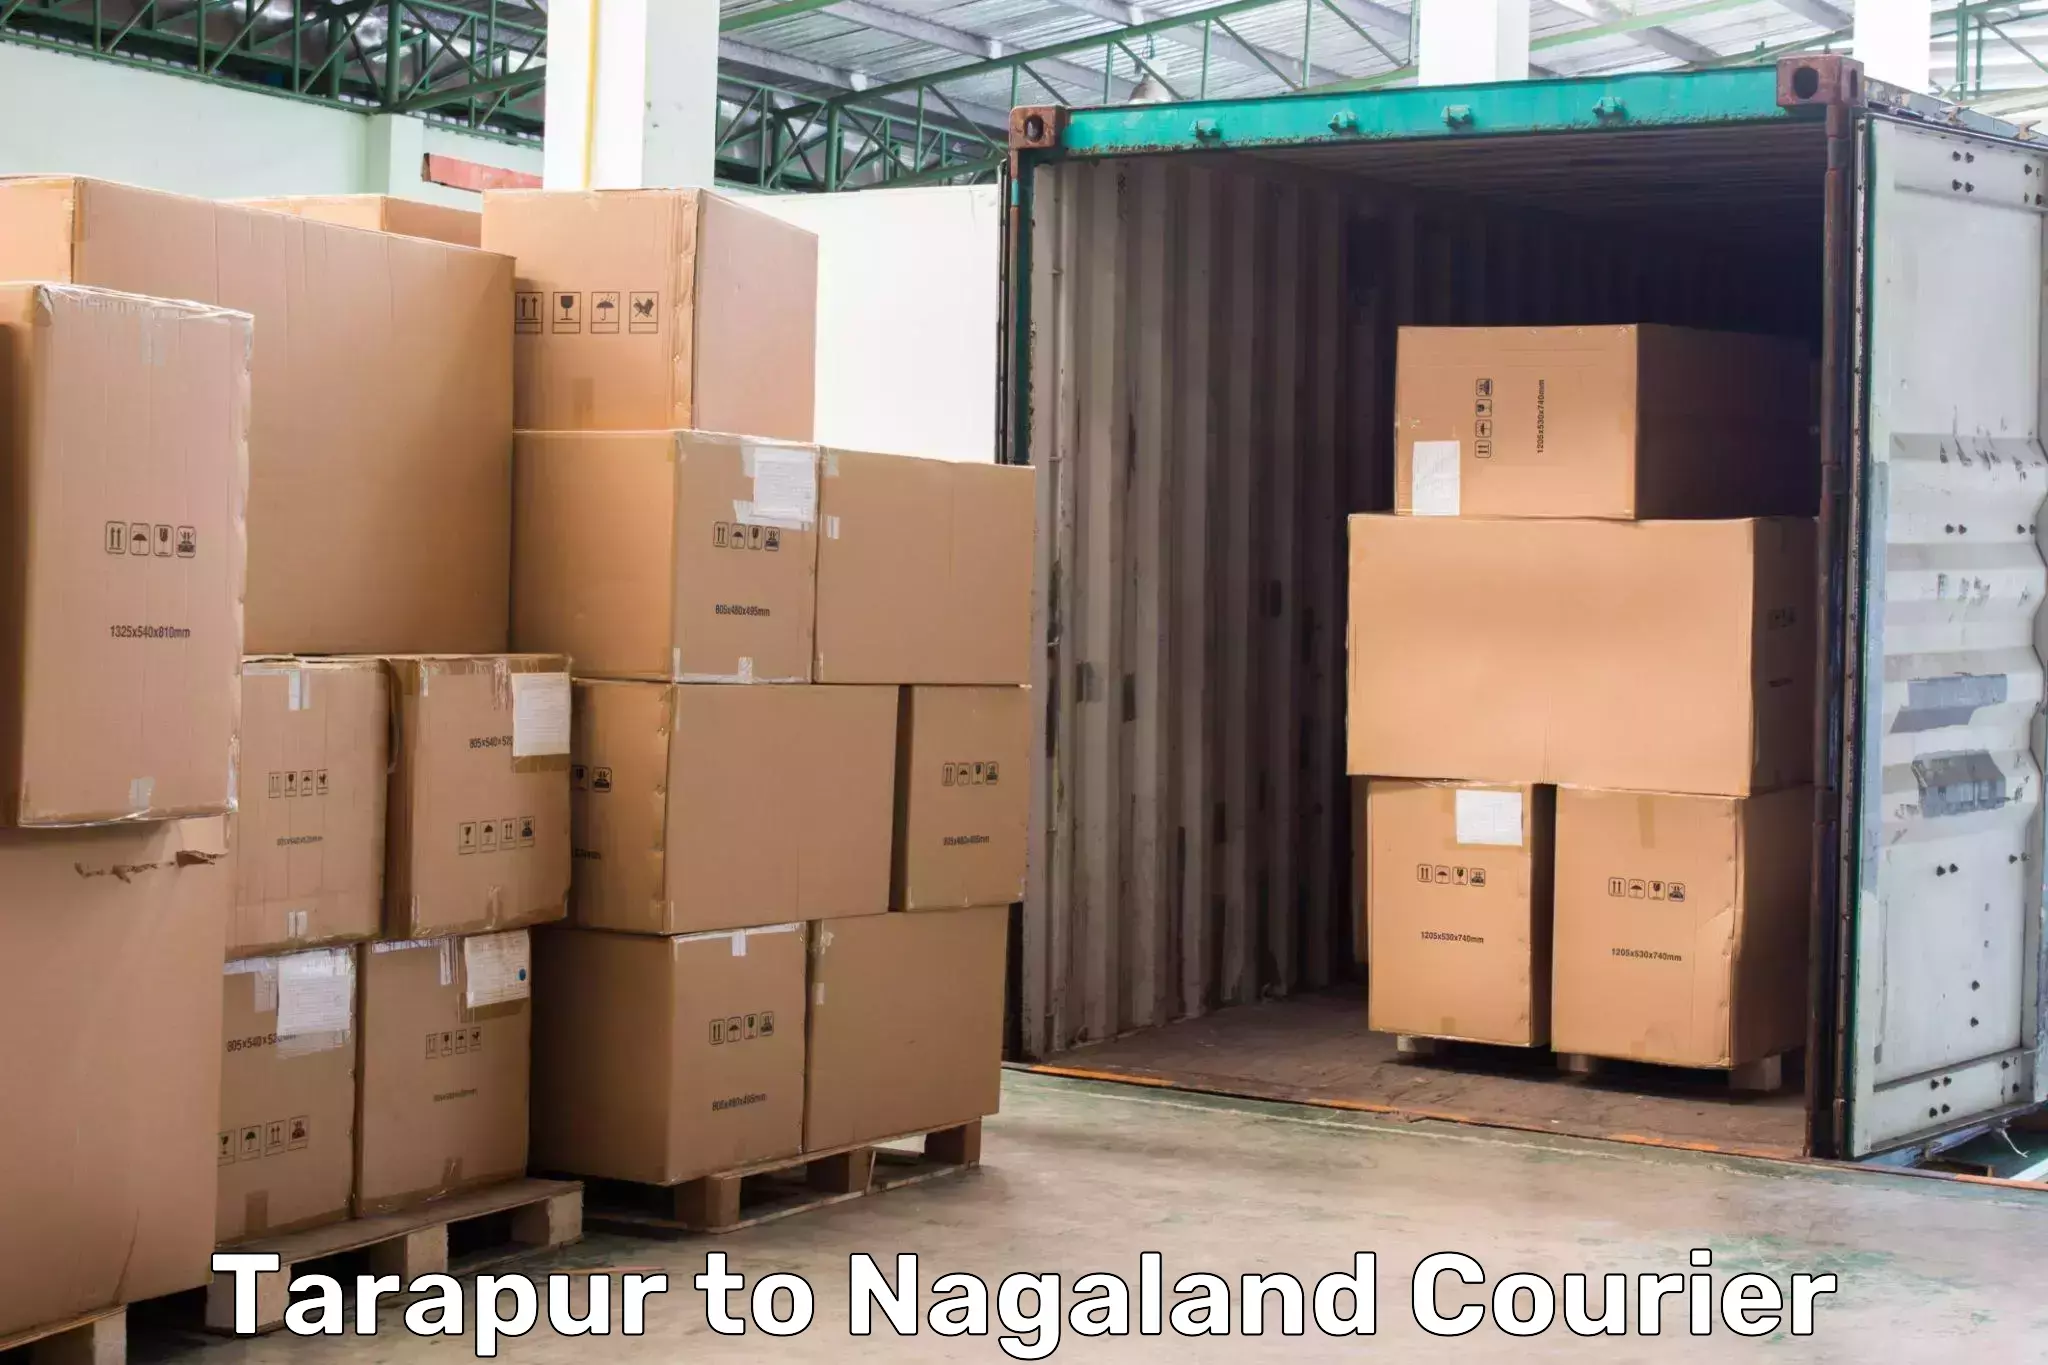 Overnight delivery services Tarapur to Nagaland